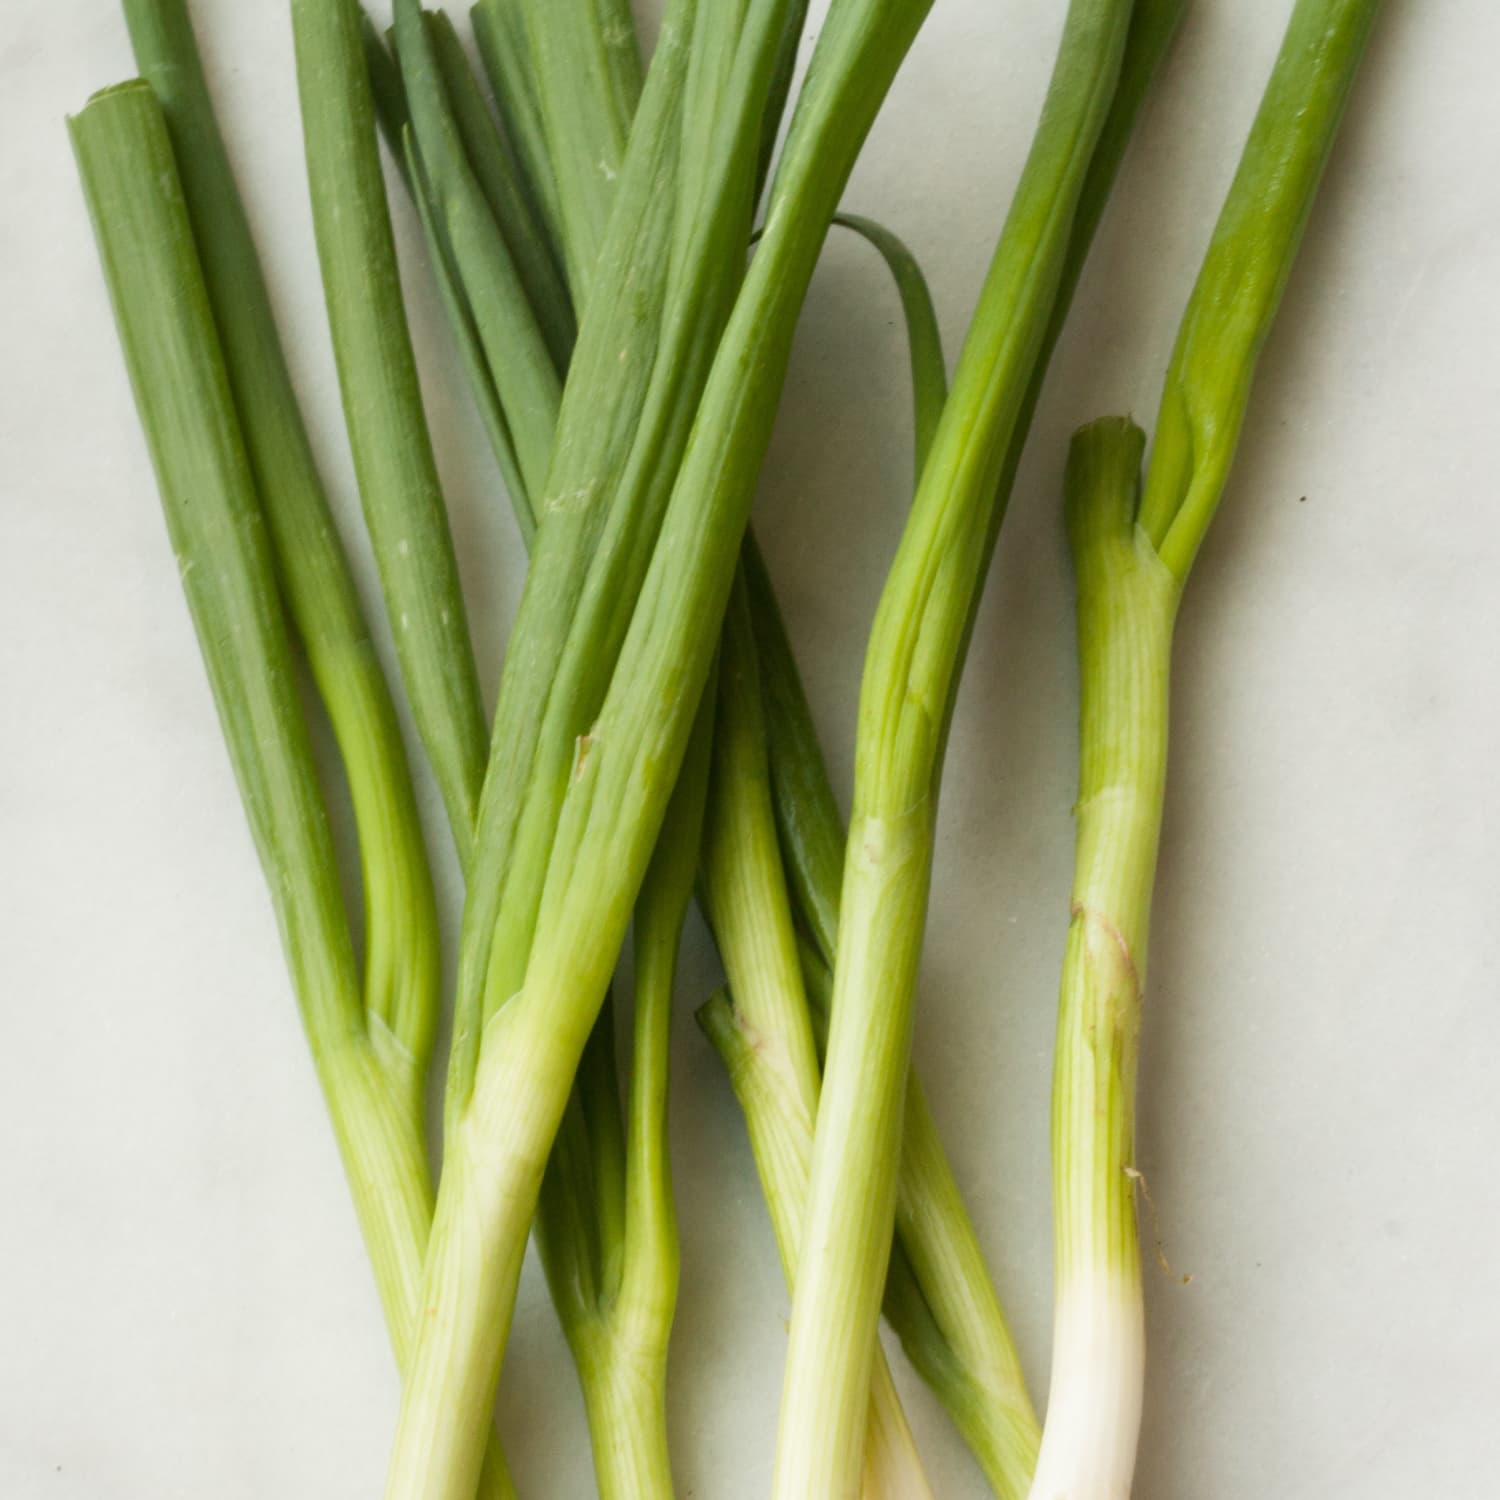 When to Use the White Part Versus the Green Part of a Scallion | Kitchn